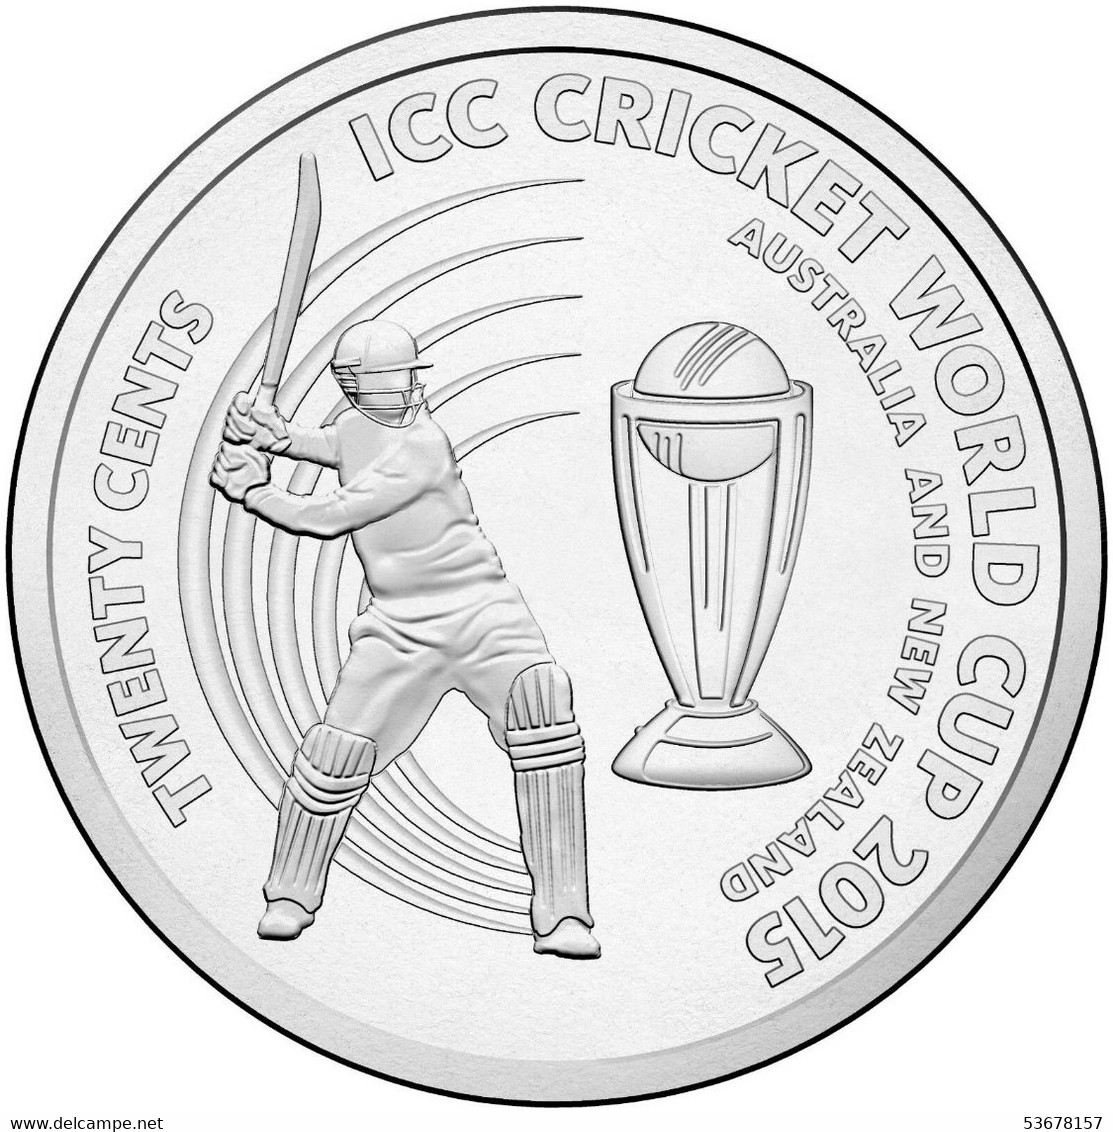 Australia - 20 Cents, 2015 Cricket World Cup 2015 - Collections